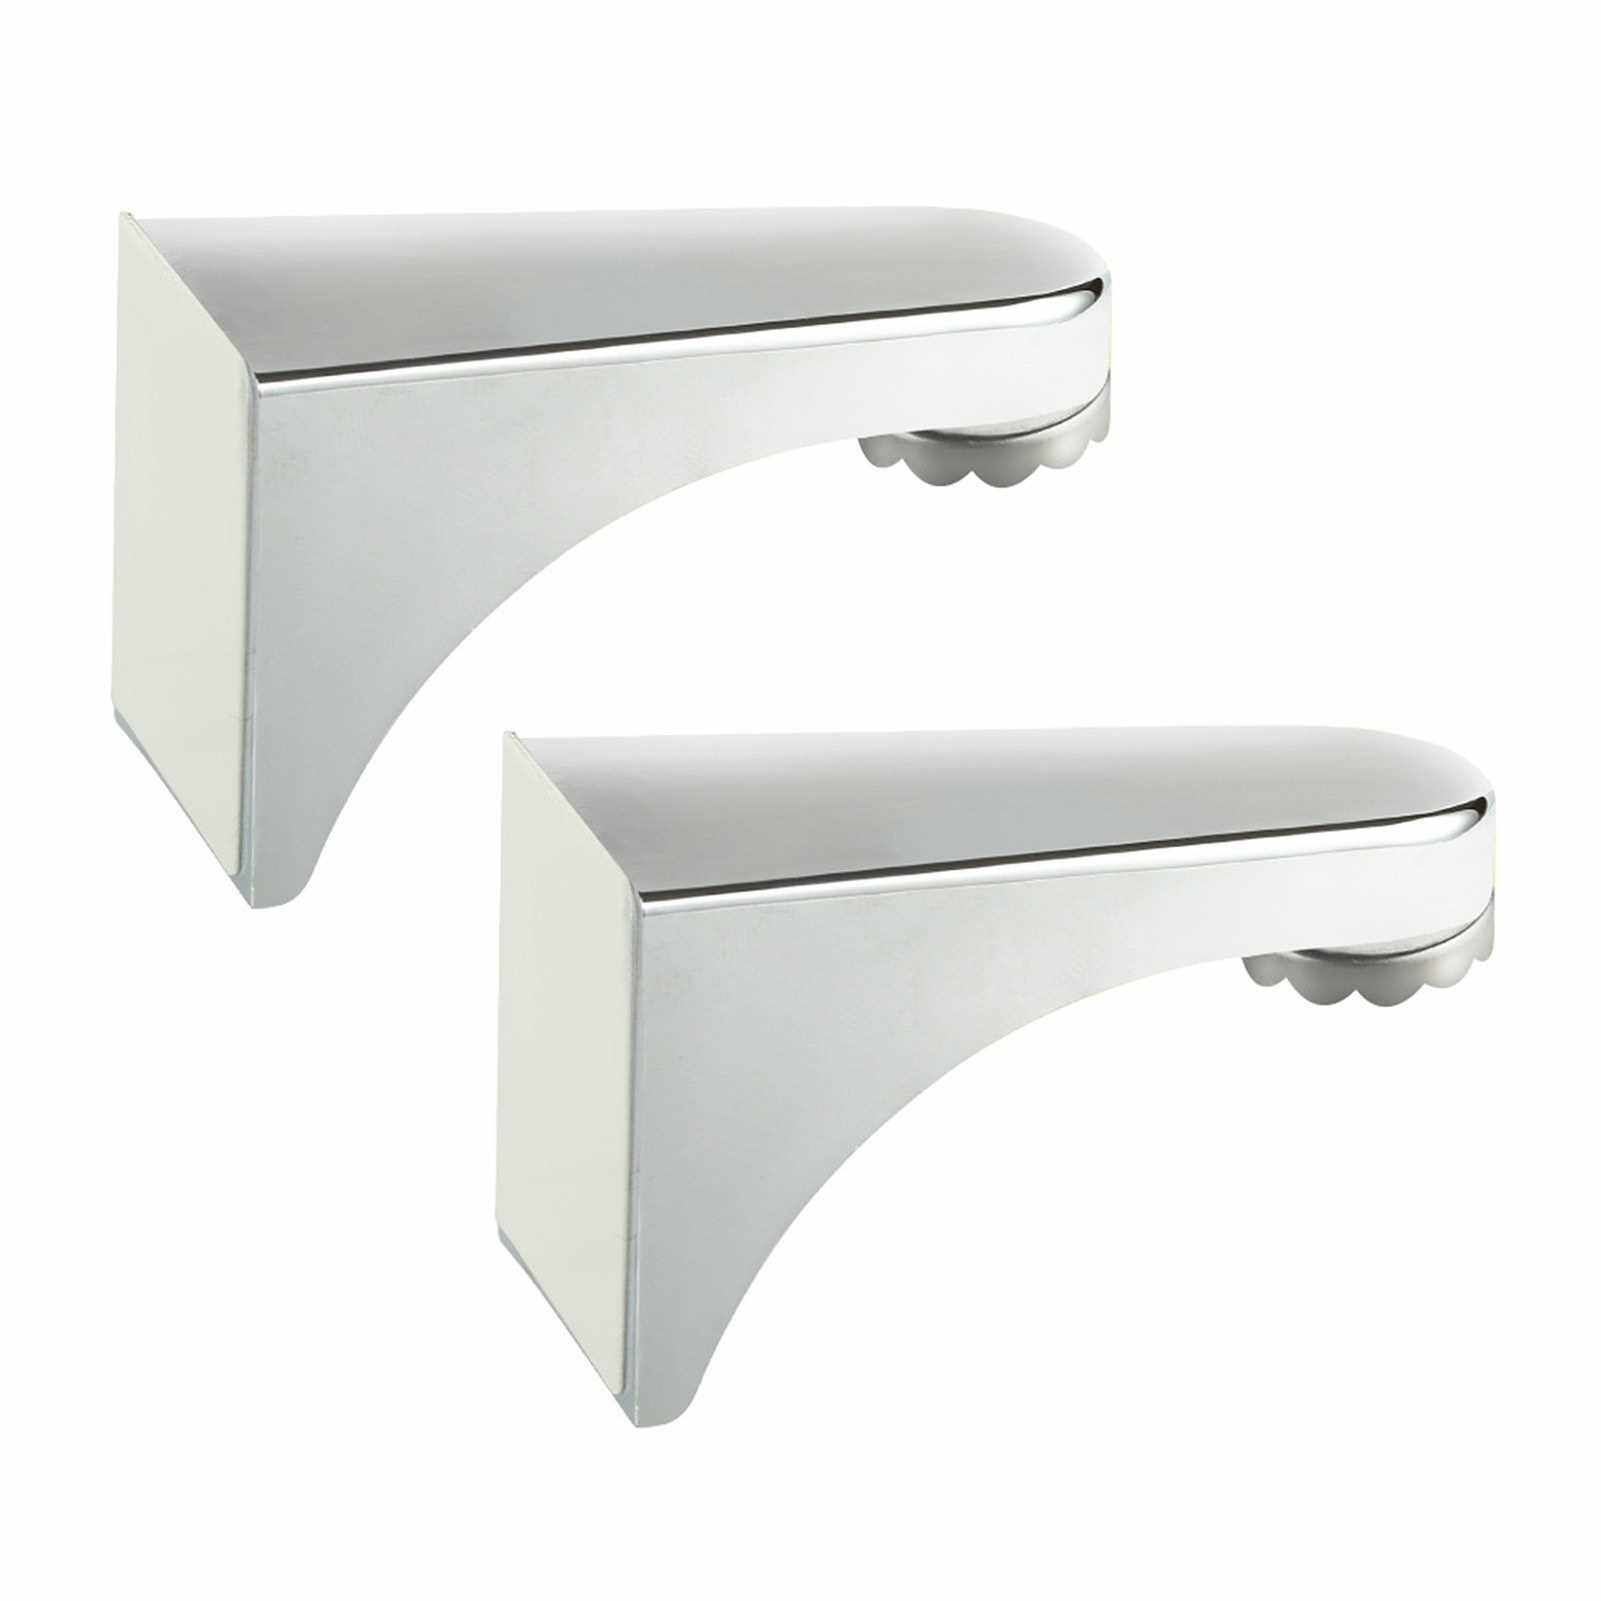 2PCS Soap Dishes Soap Holders with Magnet for Bathroom Reusable (Standard)